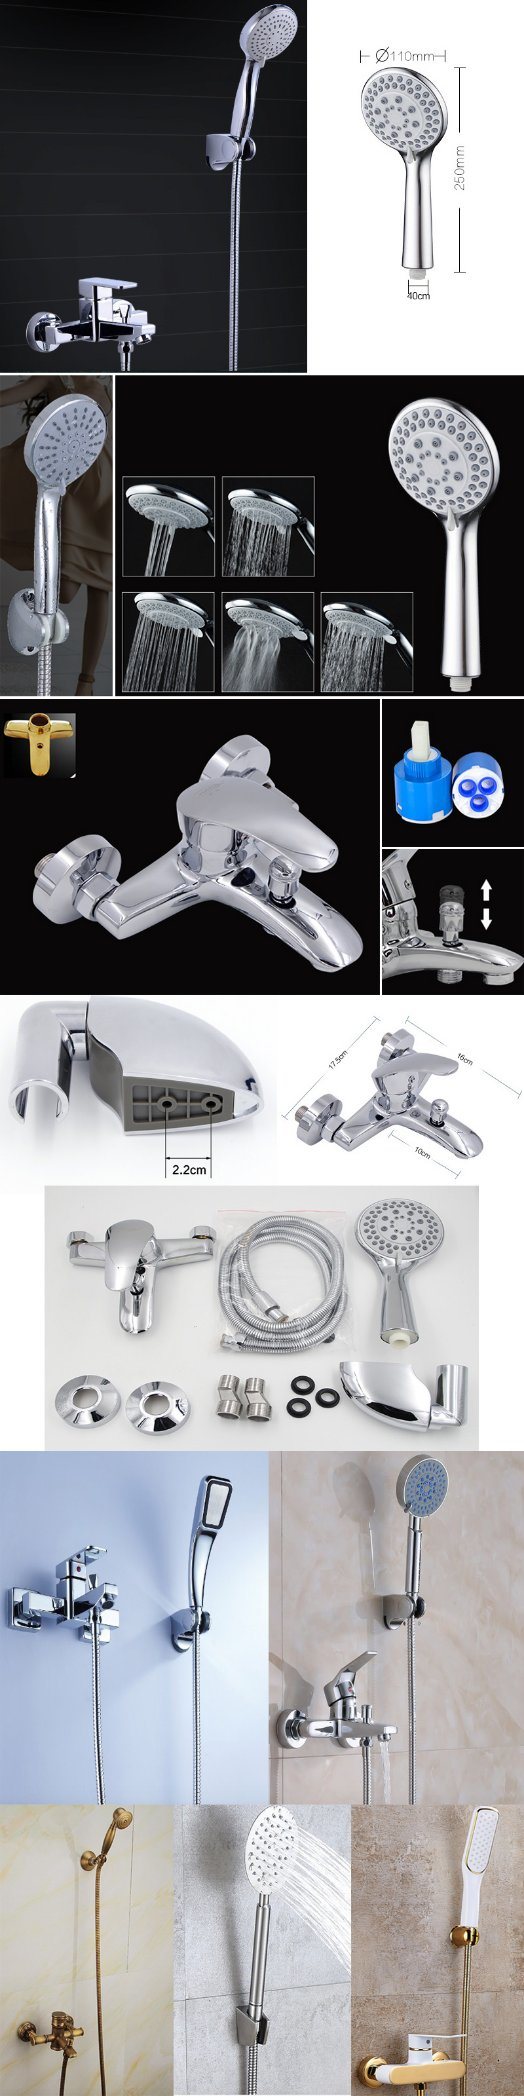 Sanitary Wares Wall Mount Bracket Simple Bathroom Faucet Brass Shower Set with Stainless Steel Hose